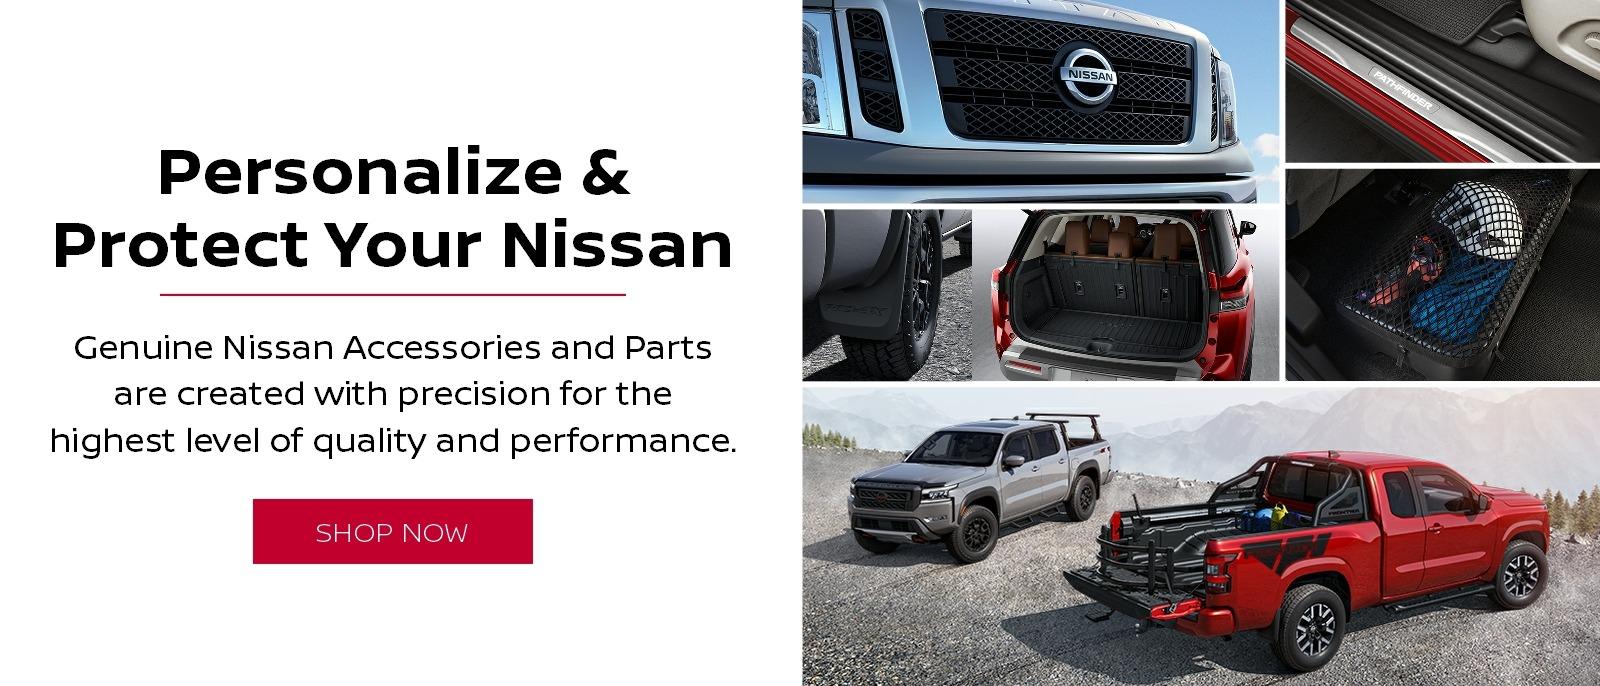 Personalize & Protect Your Nissan
Genuine Nissan Accessories and Parts are created with precision for the highest level of quality and performance. 
Order Today